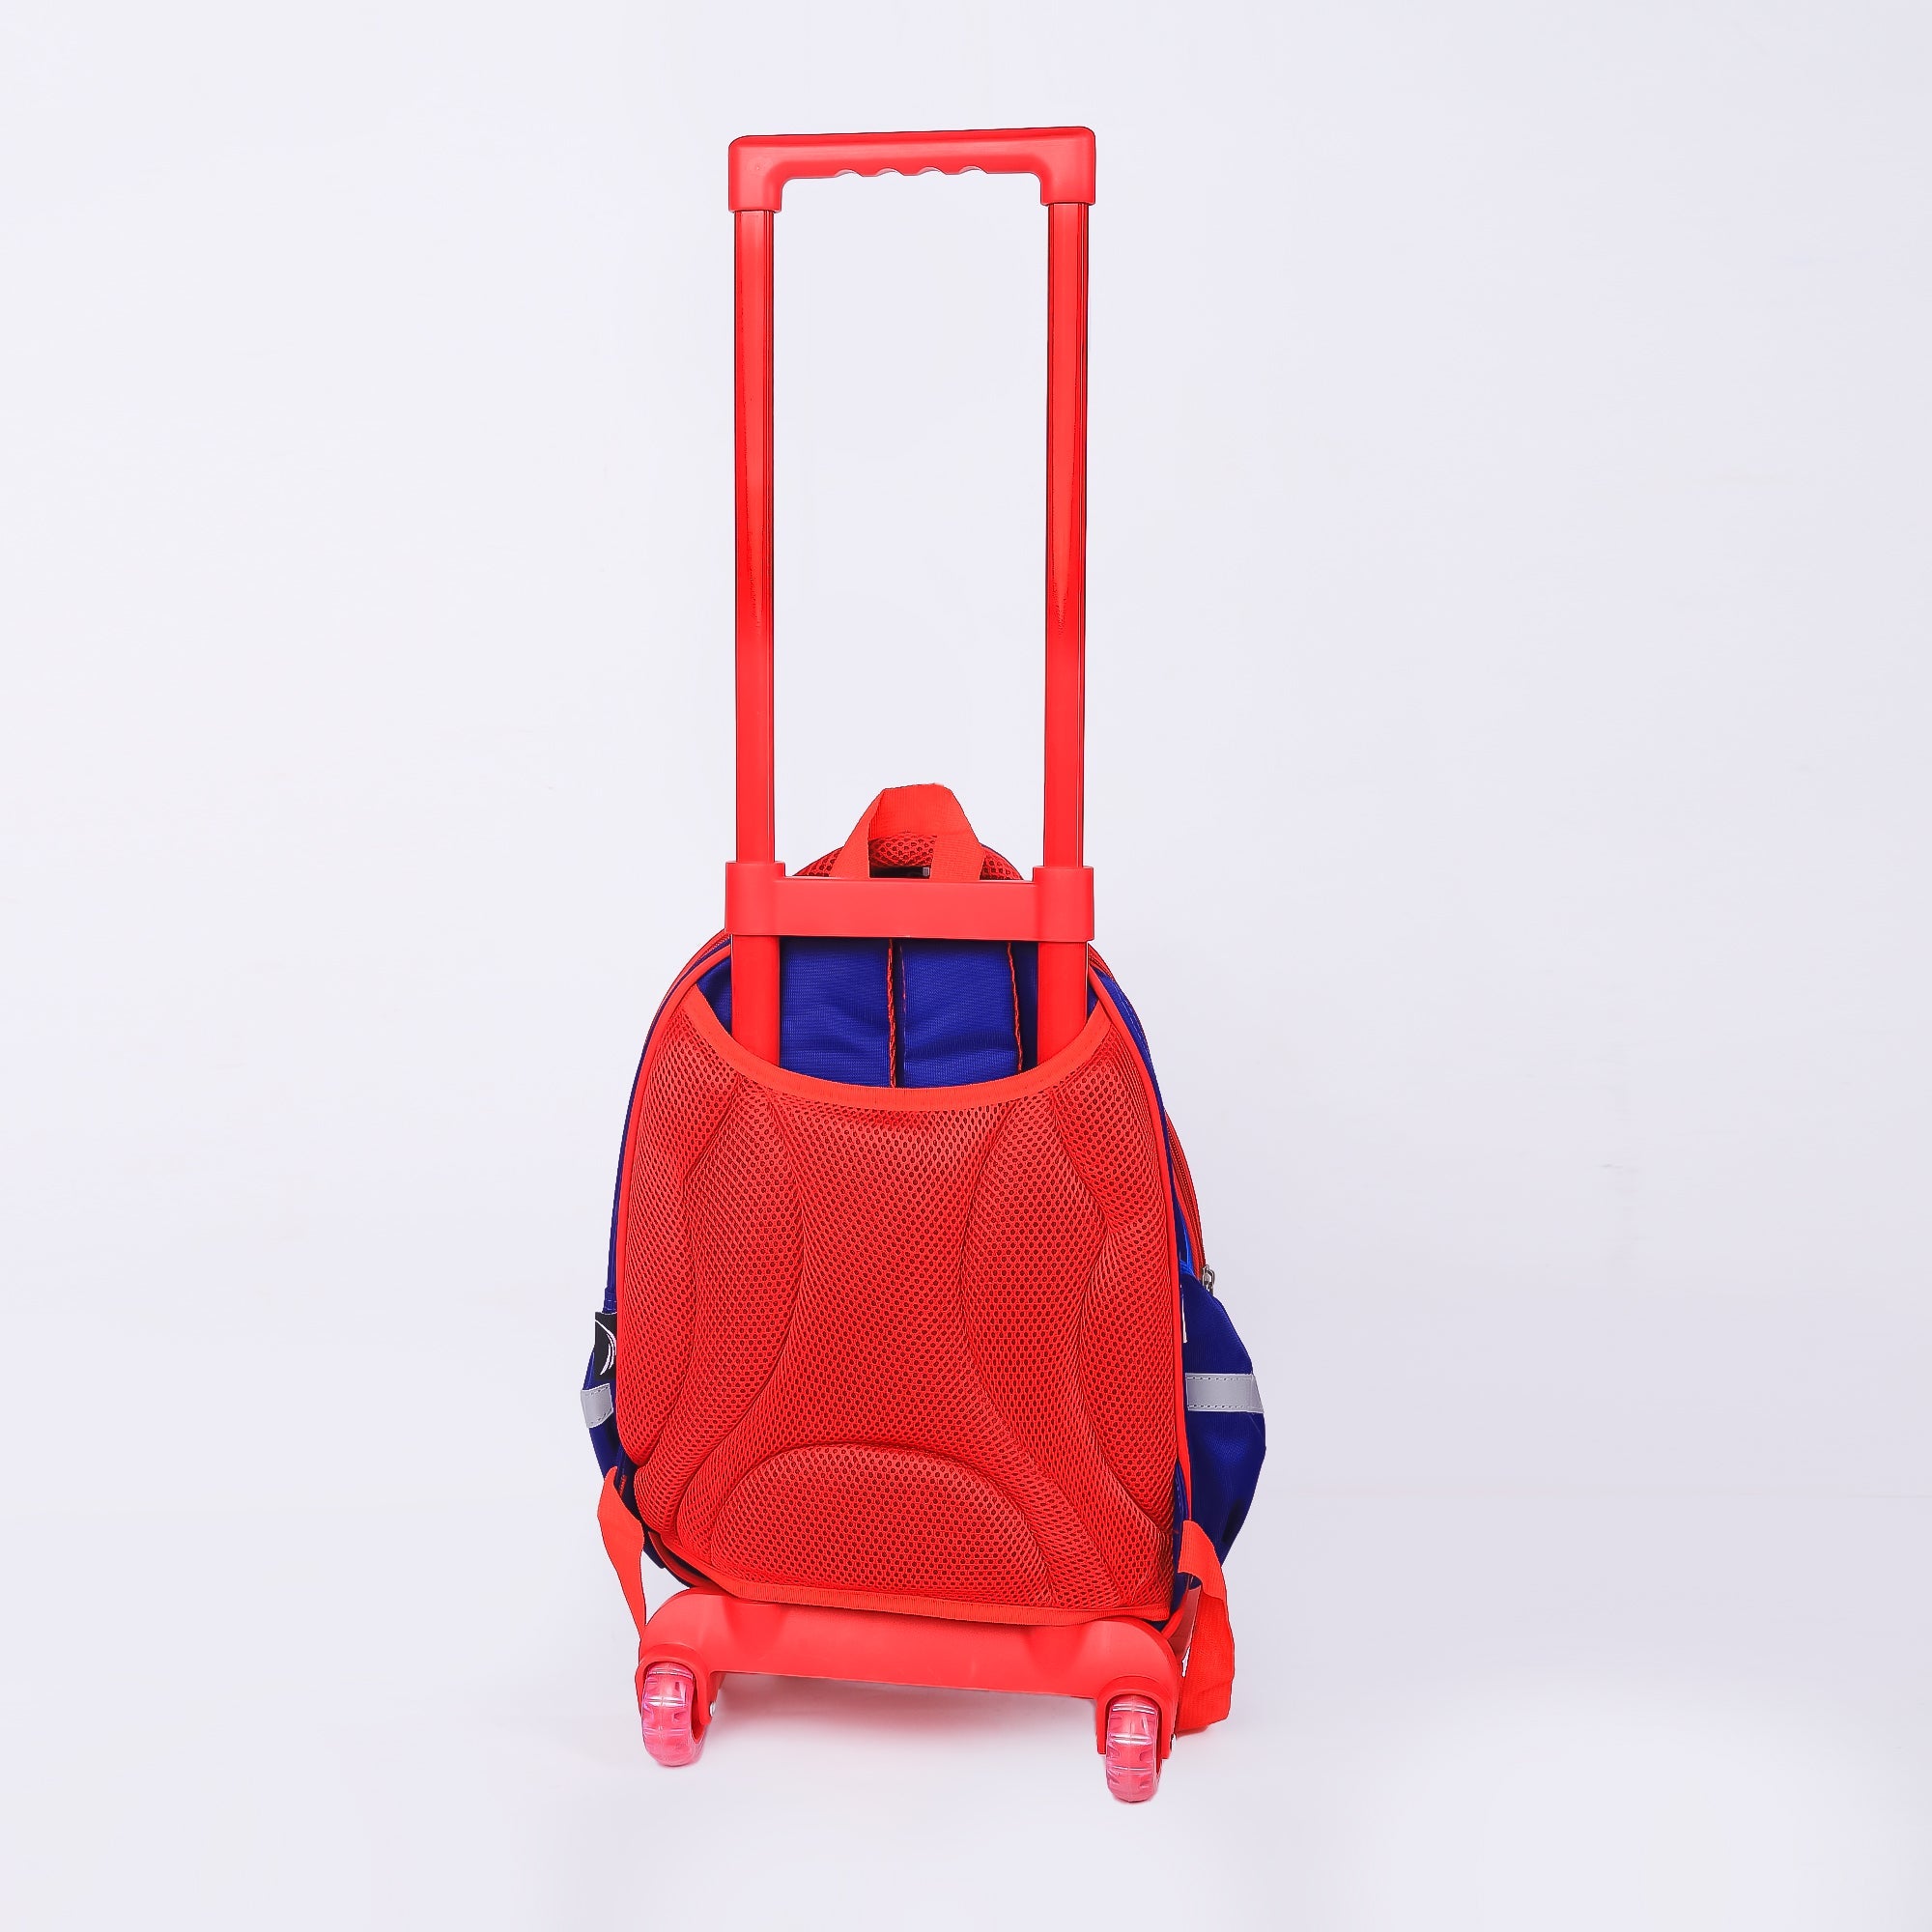 Spider Man Trolly Bag For Kids 15 INCH